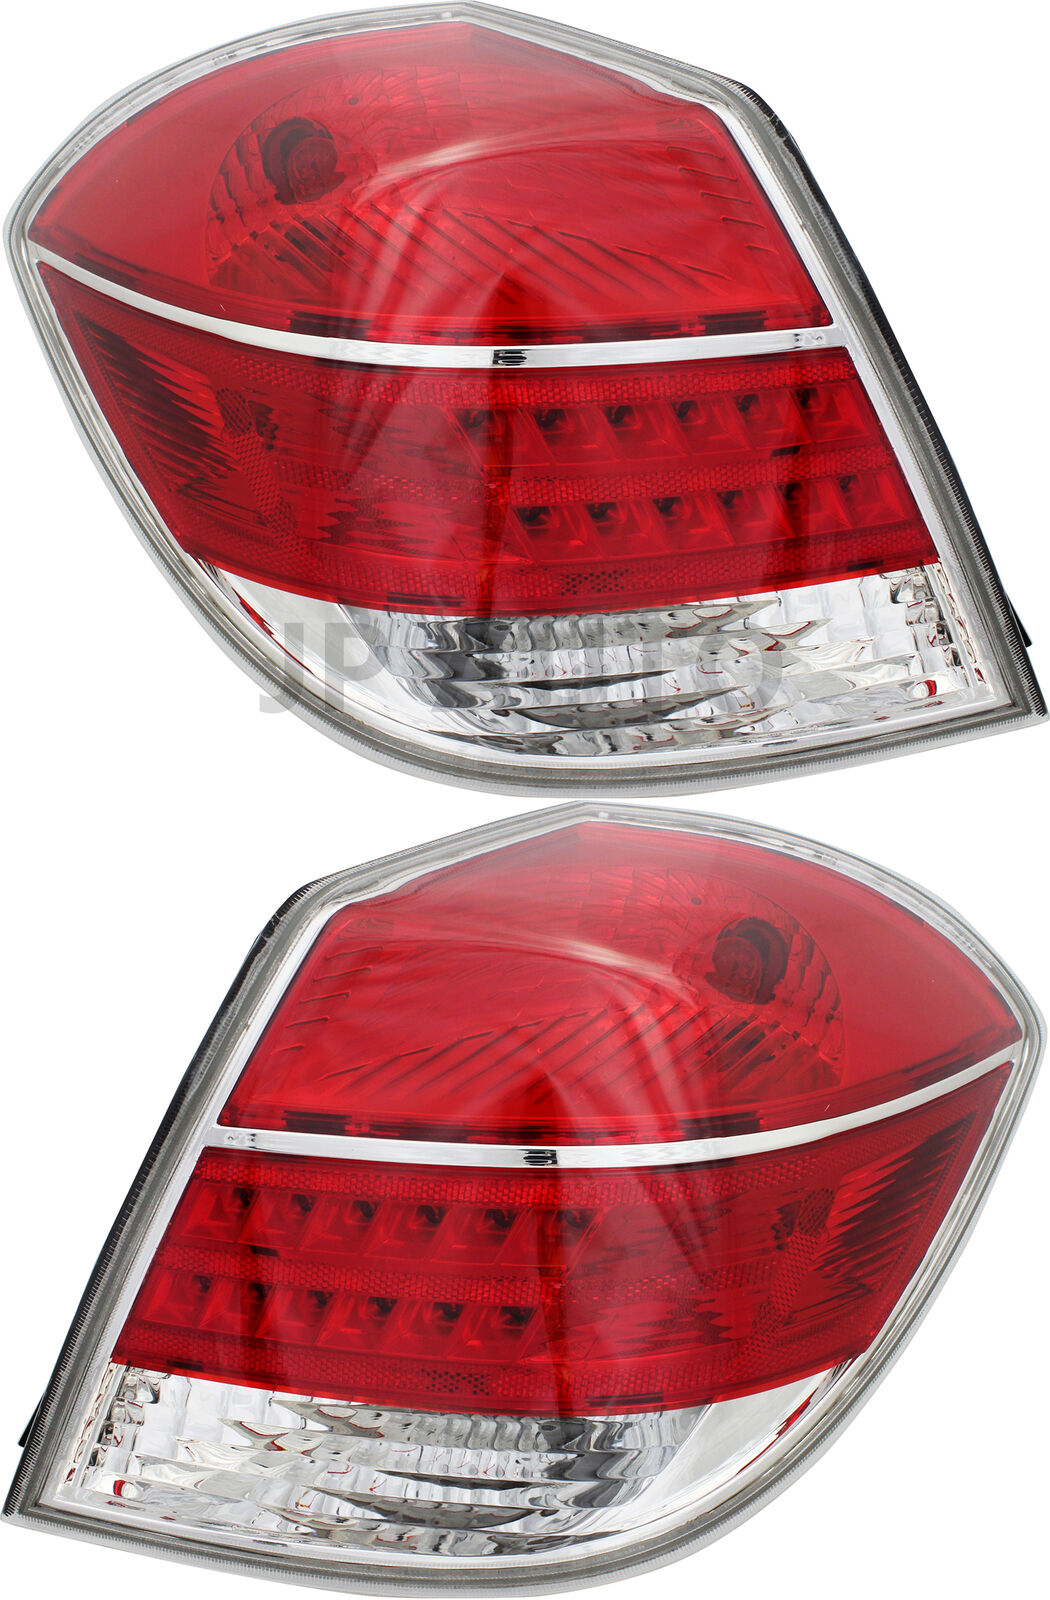 For 2007-2009 Saturn Aura Tail Light Set Driver and Passenger Side